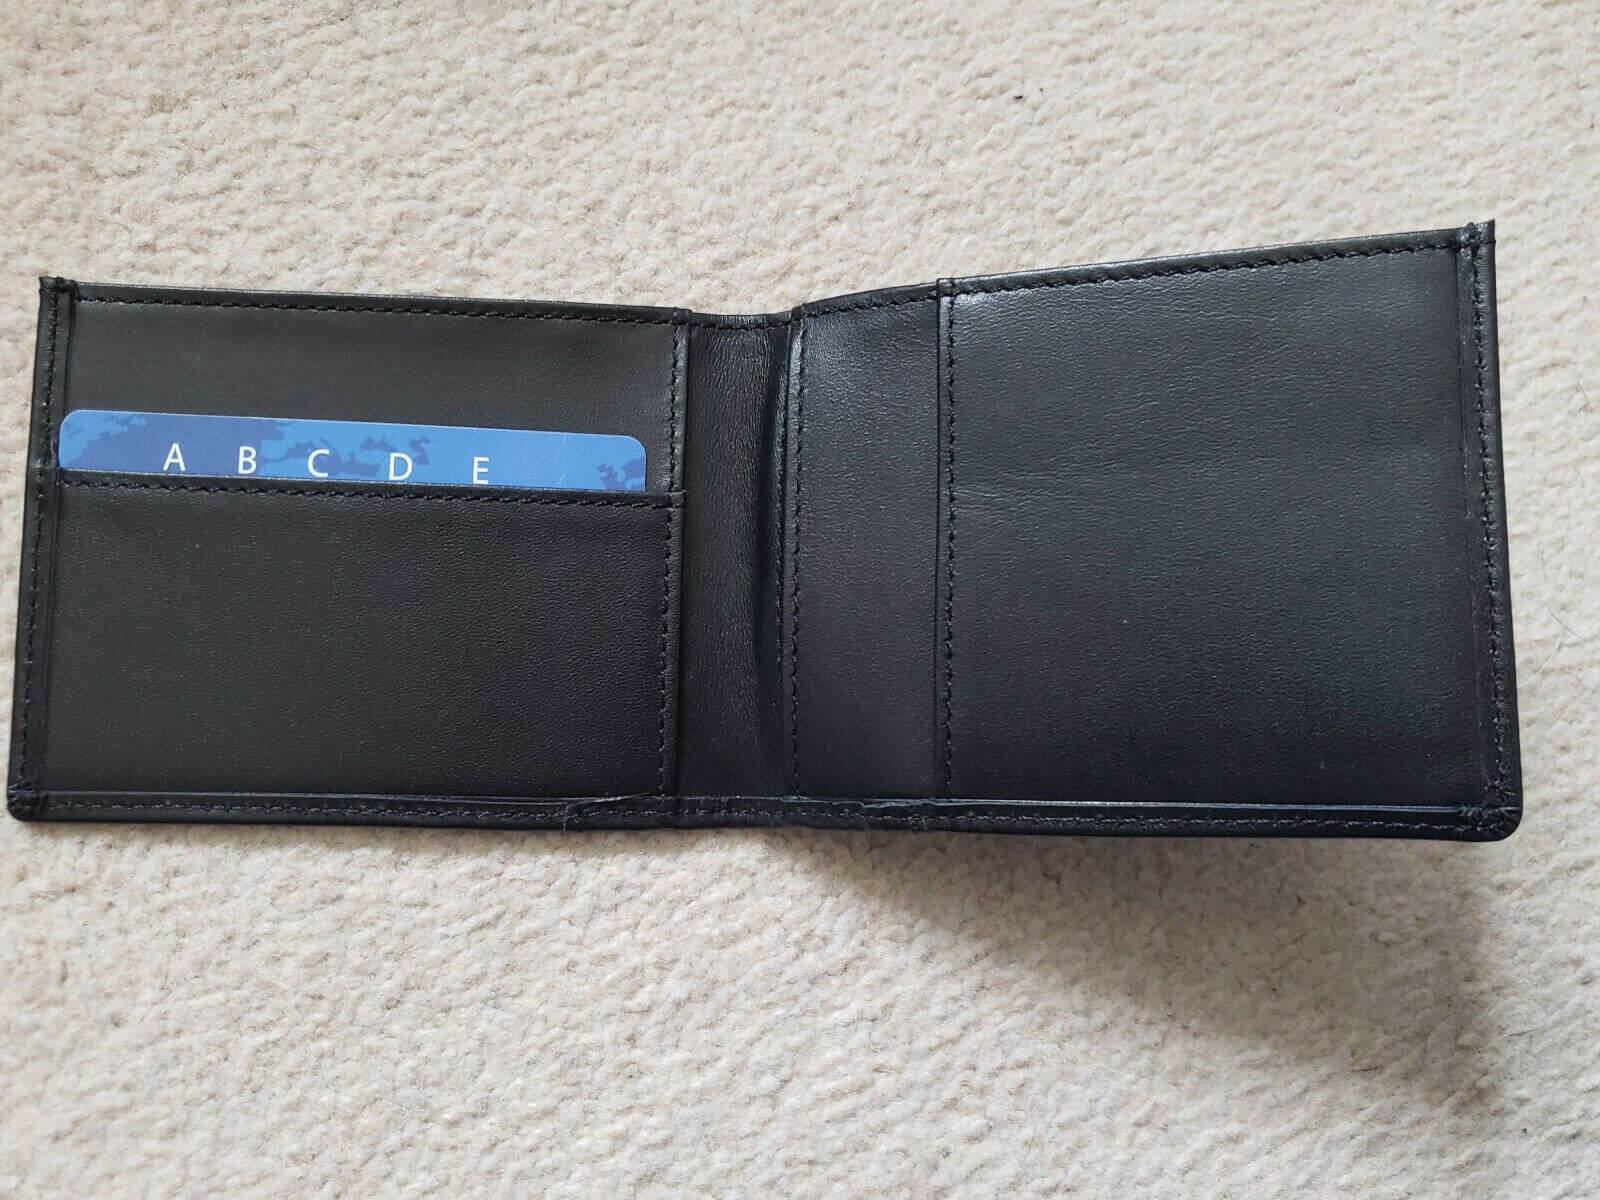 Minimal Wallet by Alan Wong & Pablo Amira in open position with blue card inside